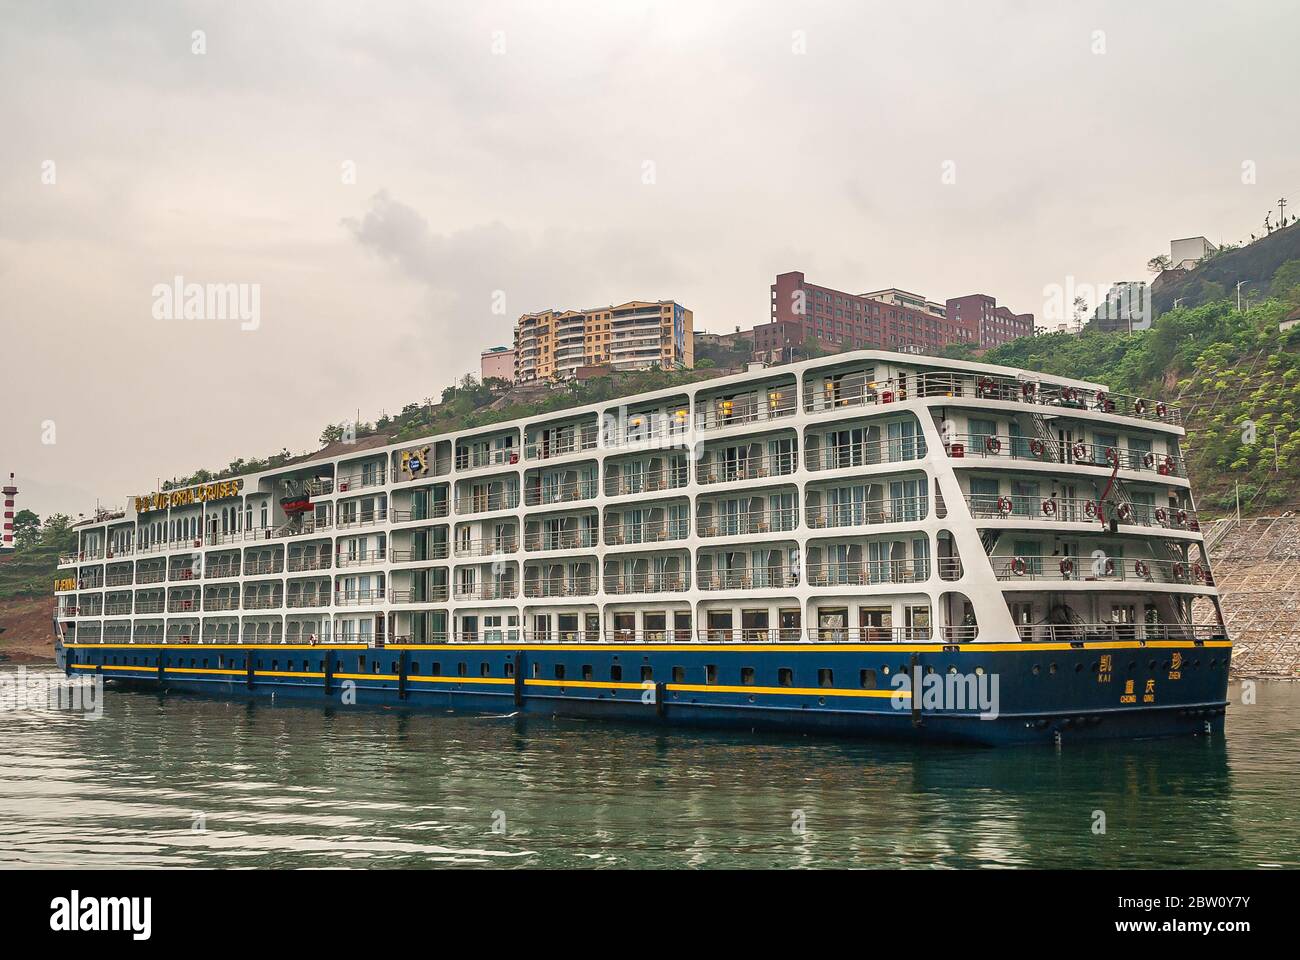 Wushan, Chongqing, China - May 7, 2010: Wu Gorge in Yangtze River. Large hotel river boat of Victoria Cruises moored in green water along shoreline wi Stock Photo